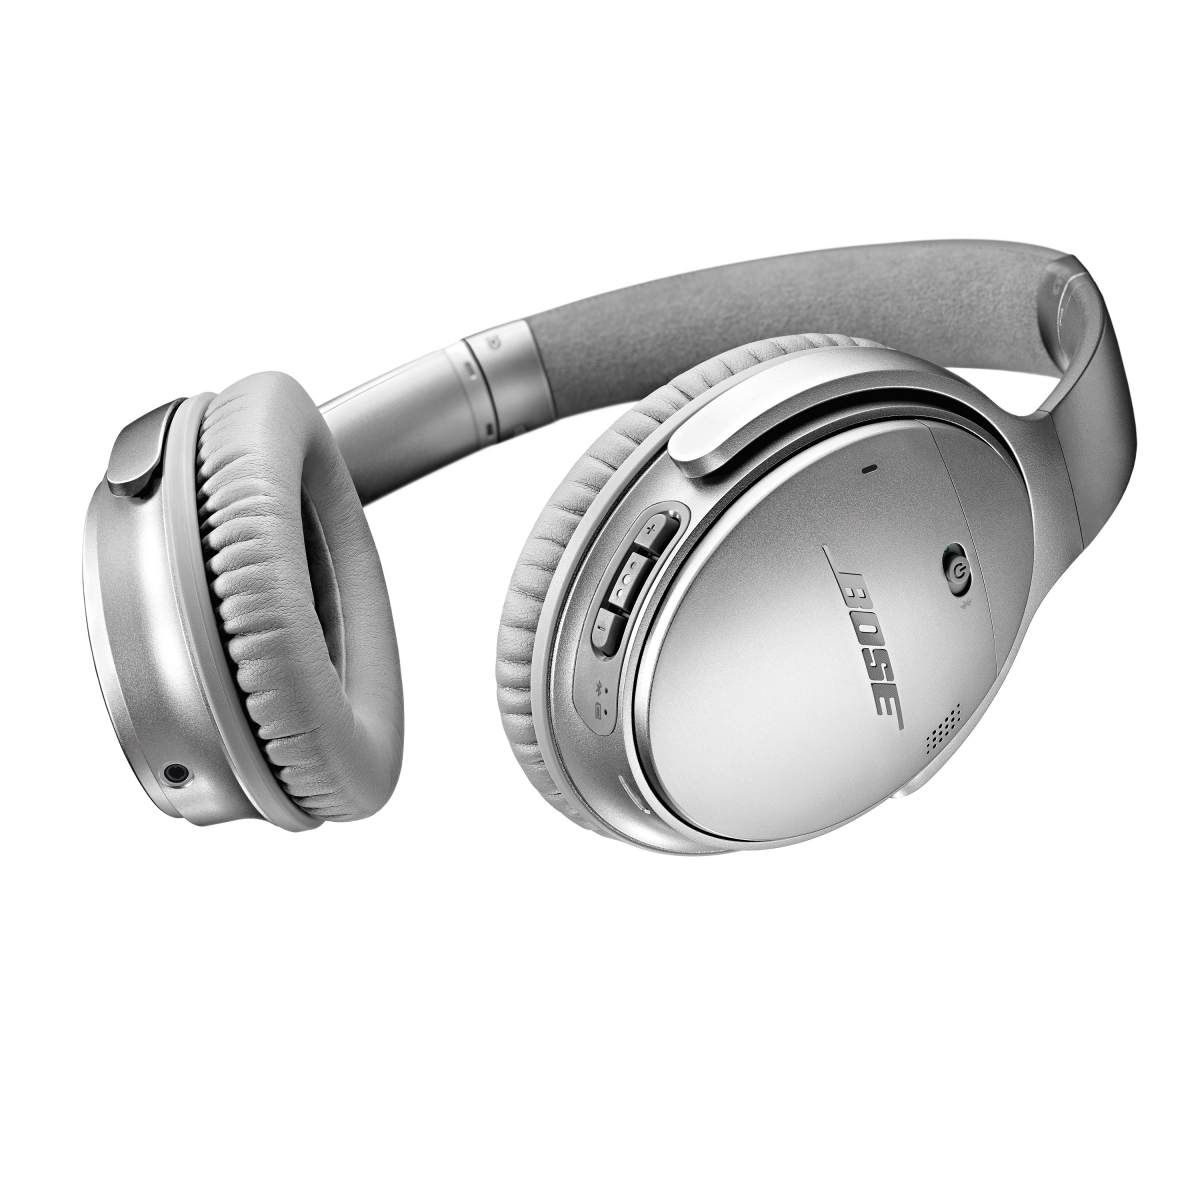 Bose adds QC 35 to its wireless audio volume